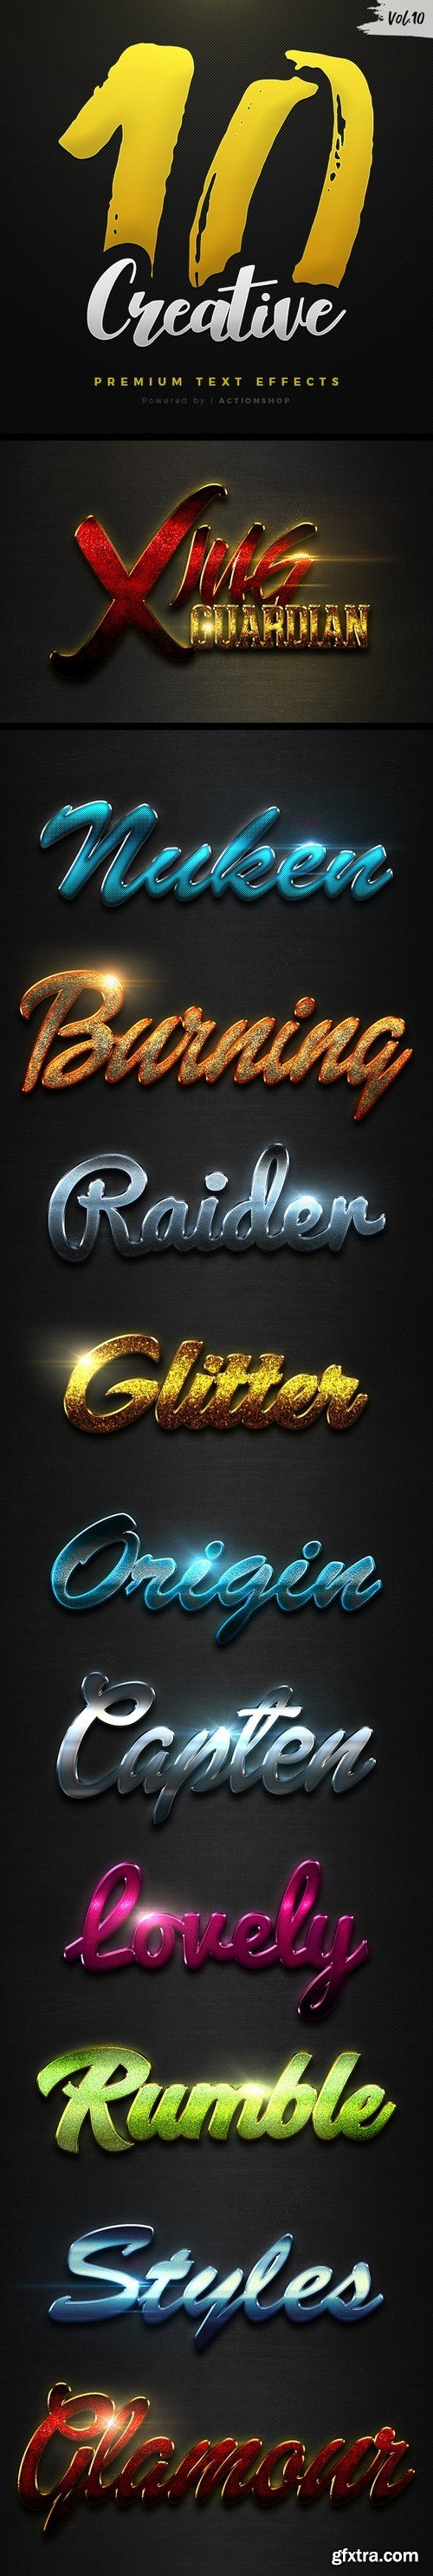 Graphicriver - 10 Creative Text Effects Vol.10 21118588